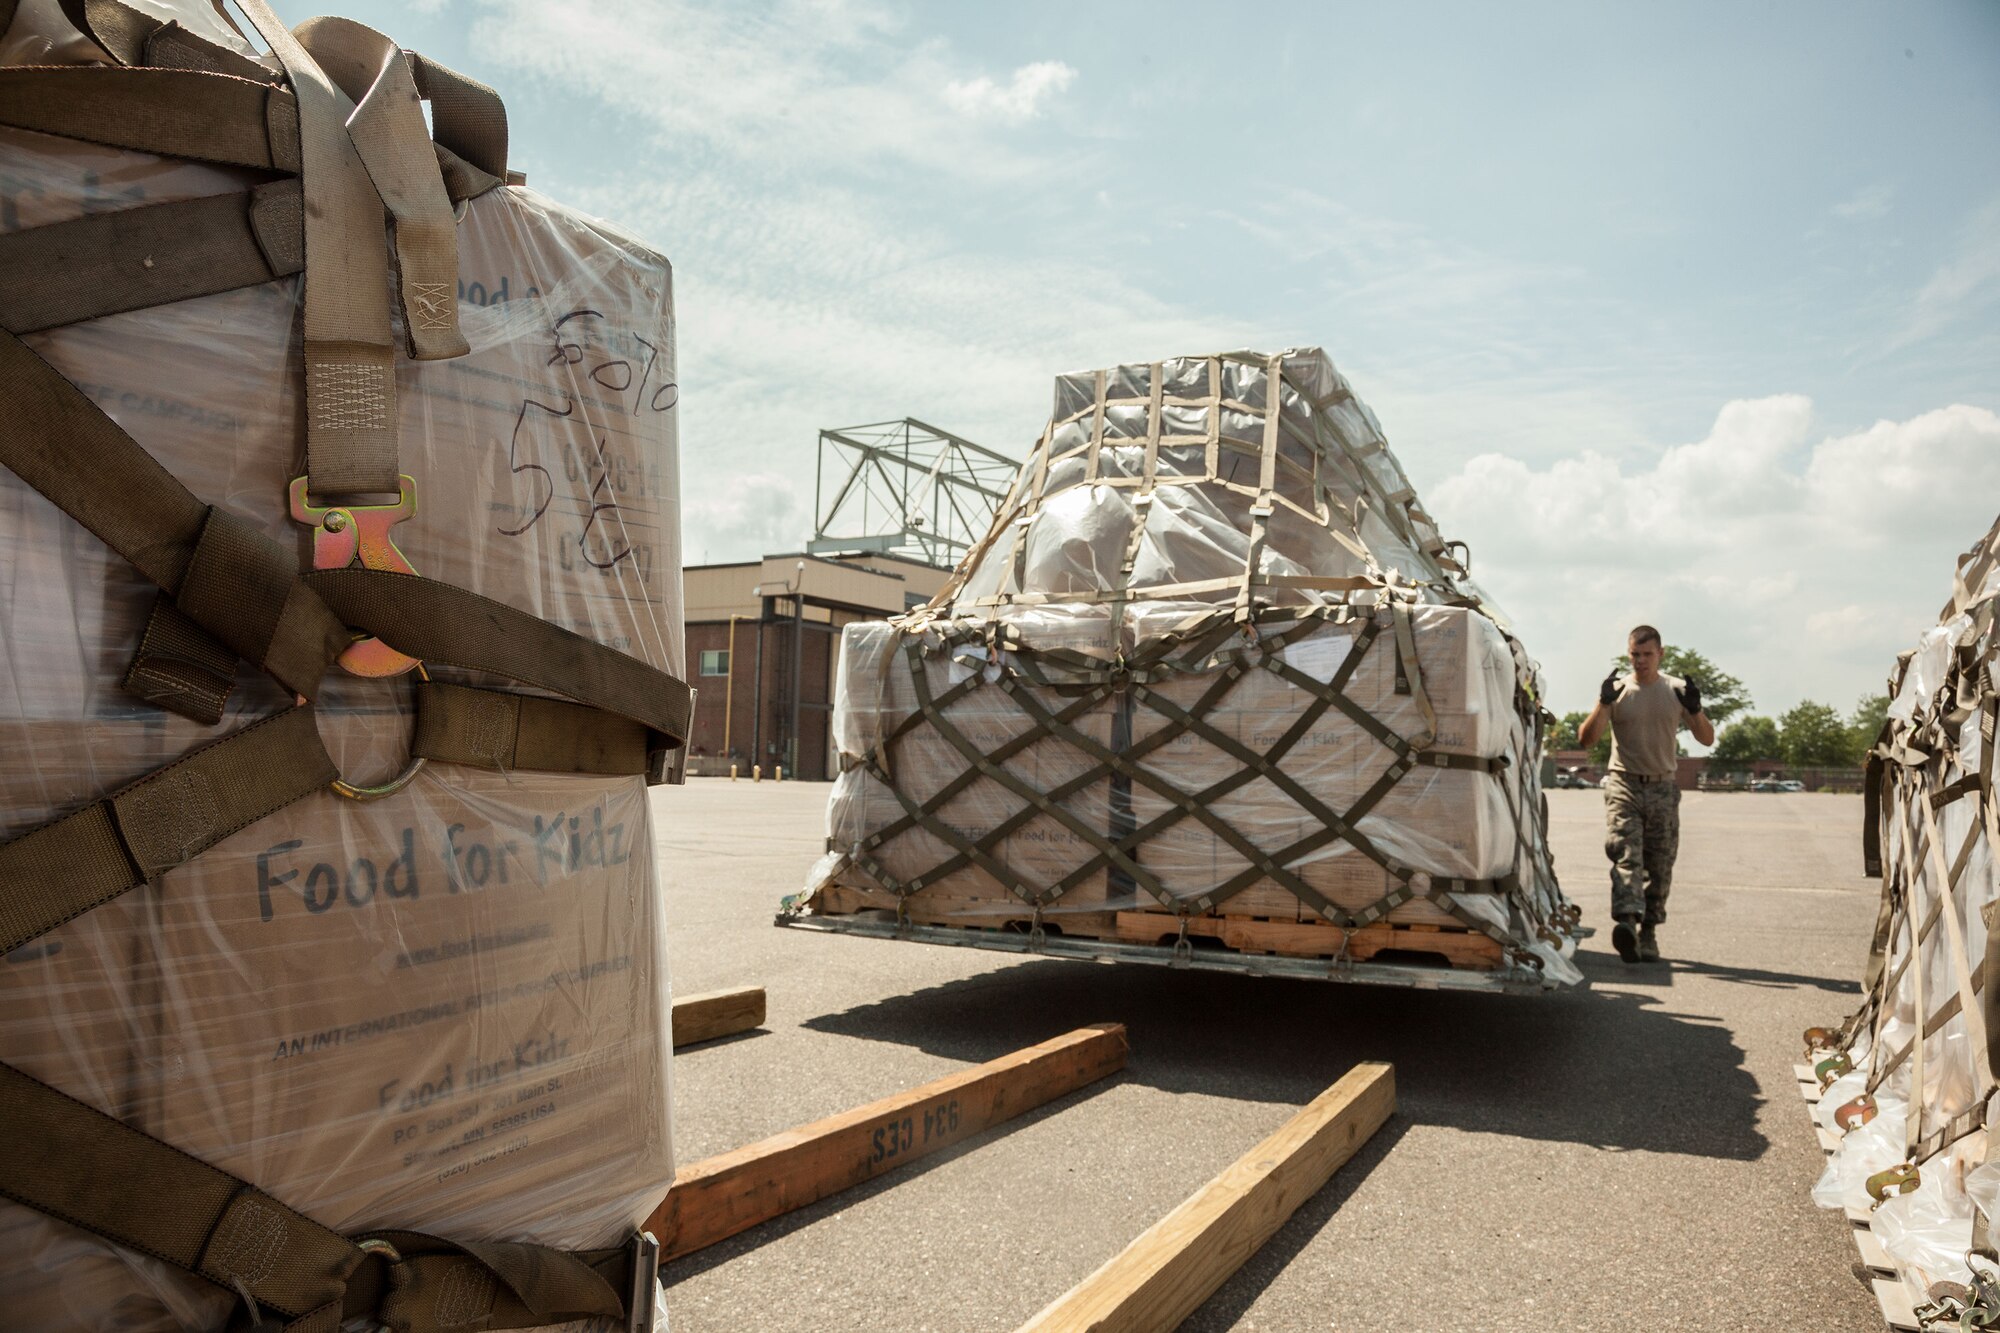 Airmen from the 27th Aerial Port Squadron work to stage humanitarian aid pallets for Saturday's shipment out of the Minneapolis-St. Paul Air Reserve Station, Minn.  The over 90,000 lbs of food from relief organization Food For Kidz will be sent to Kabul, Afghanistan, utilizing the Denton Program which allows donors to put humanitarian supplies aboard U.S. military transport on a space-available basis.  (U.S. Air Force photo/Shannon McKay)